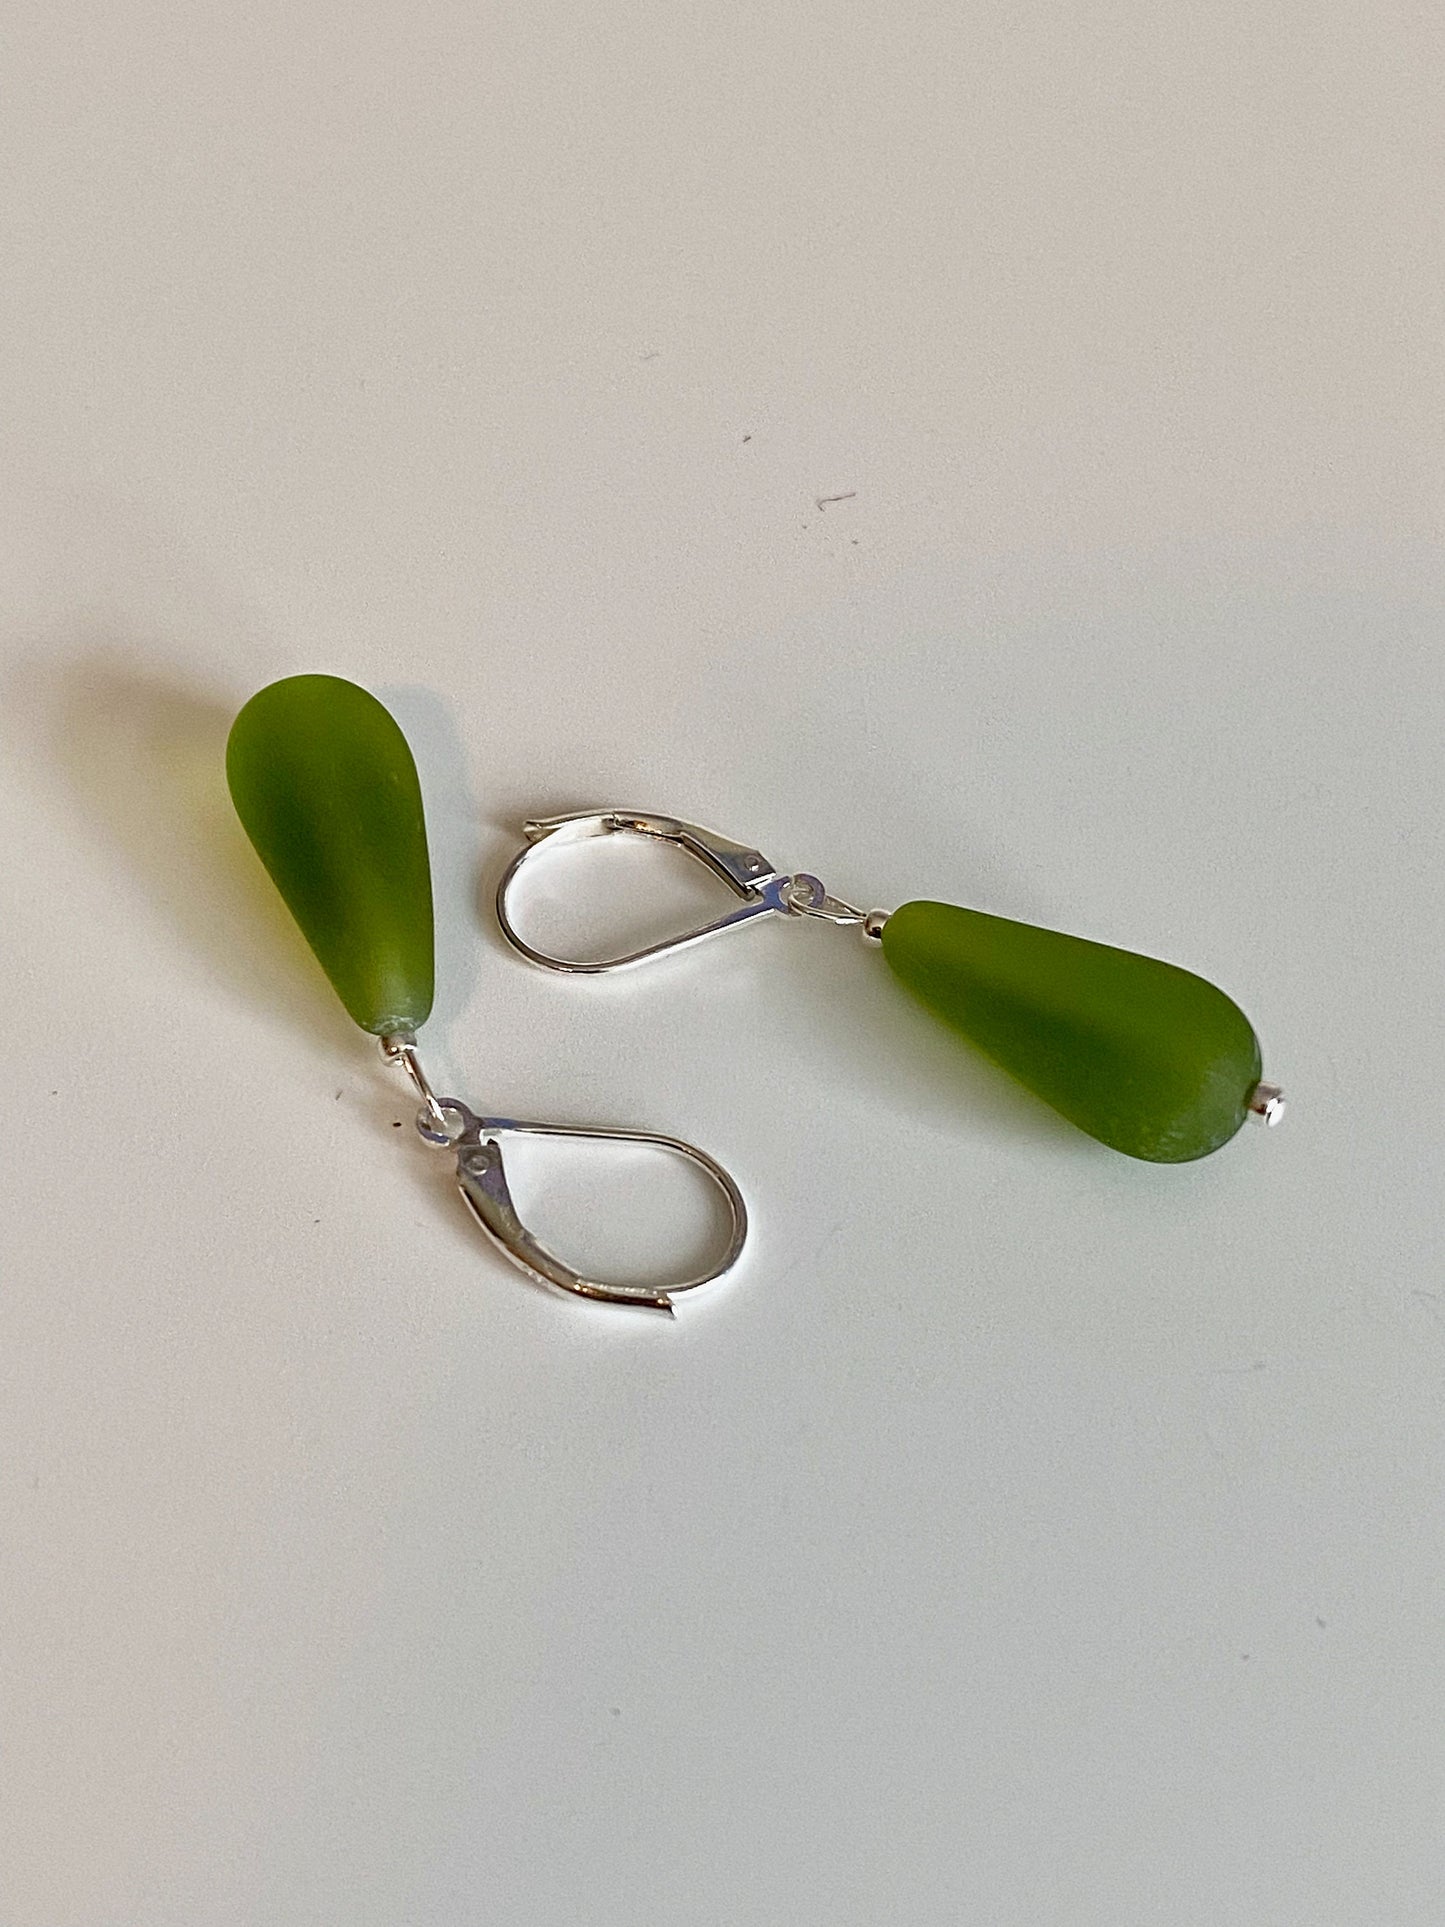 Soft sea glass type frosted olive green color teardrop earrings. Fashioned with a quality sterling silver lever back clasp.